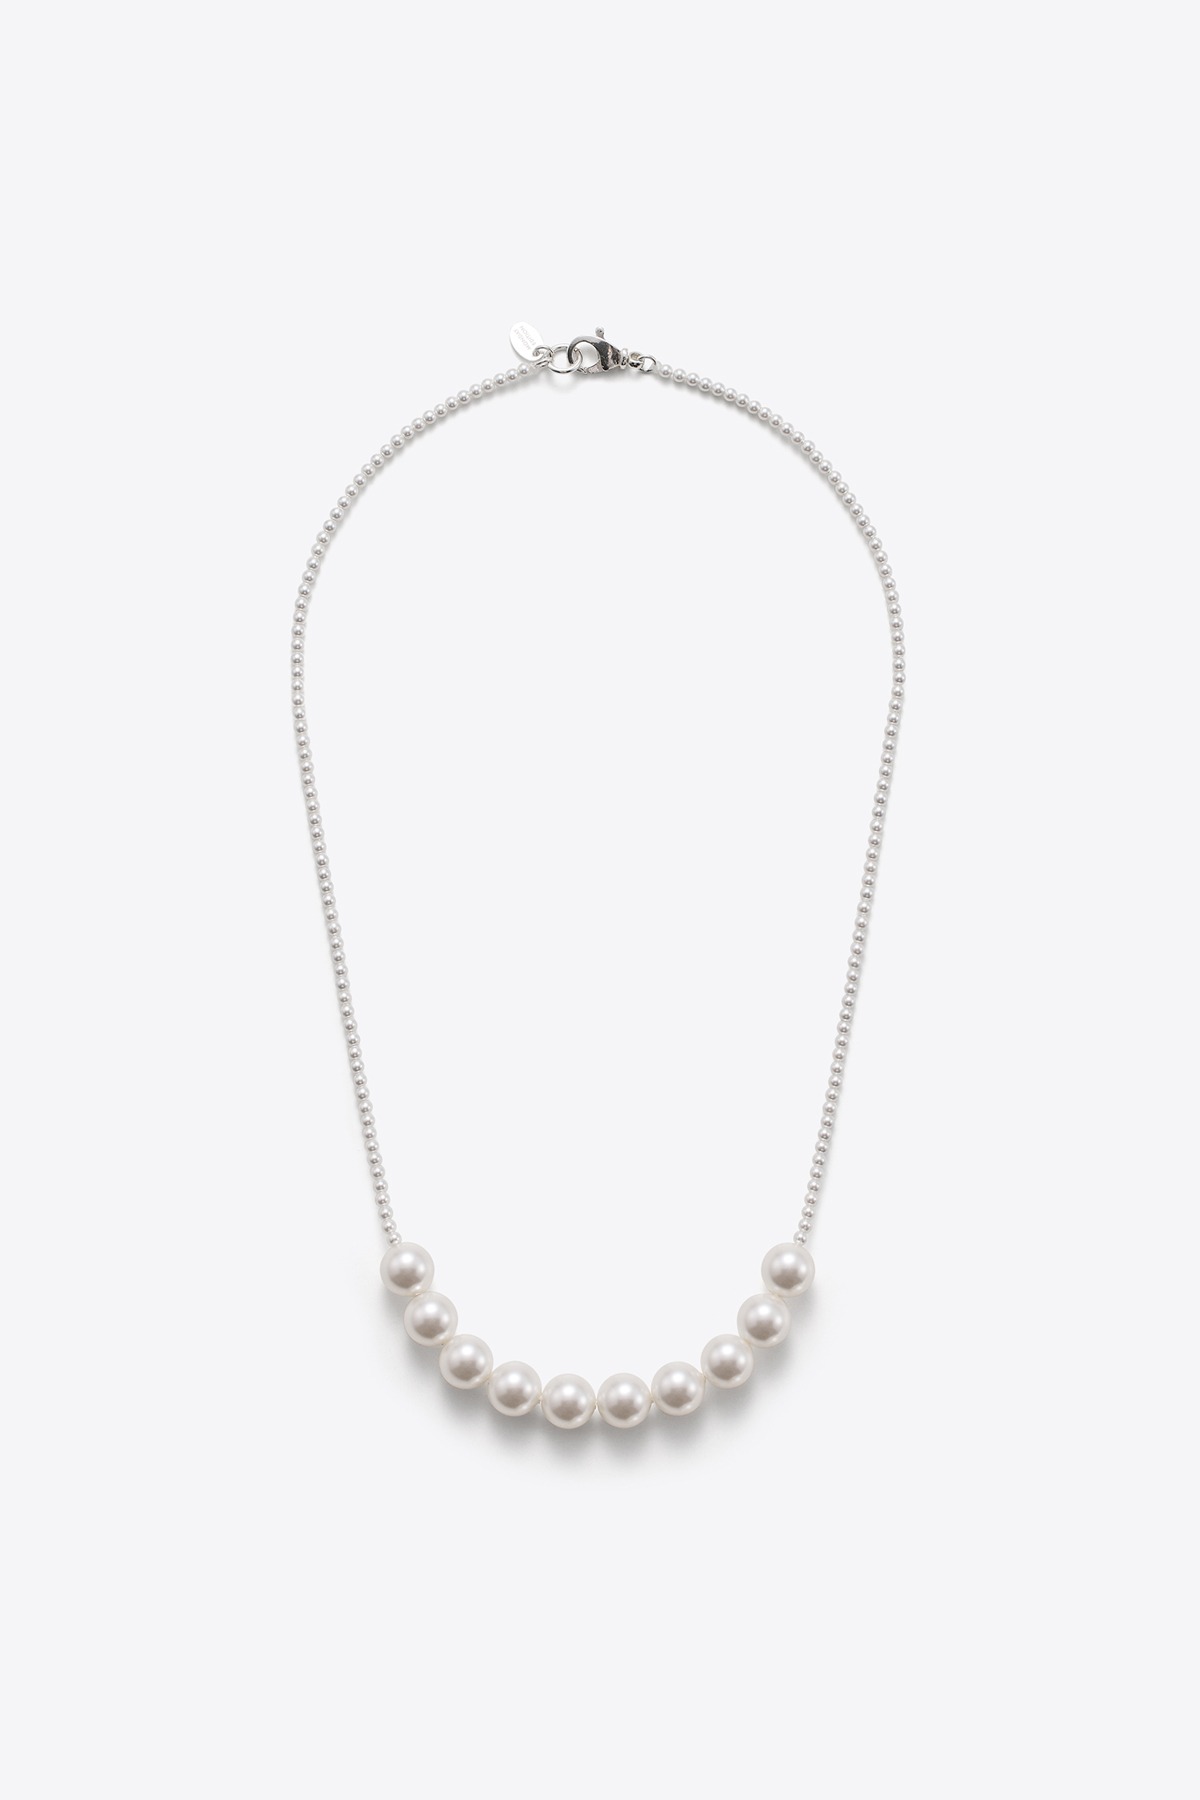 The Mixed Pearl Necklace